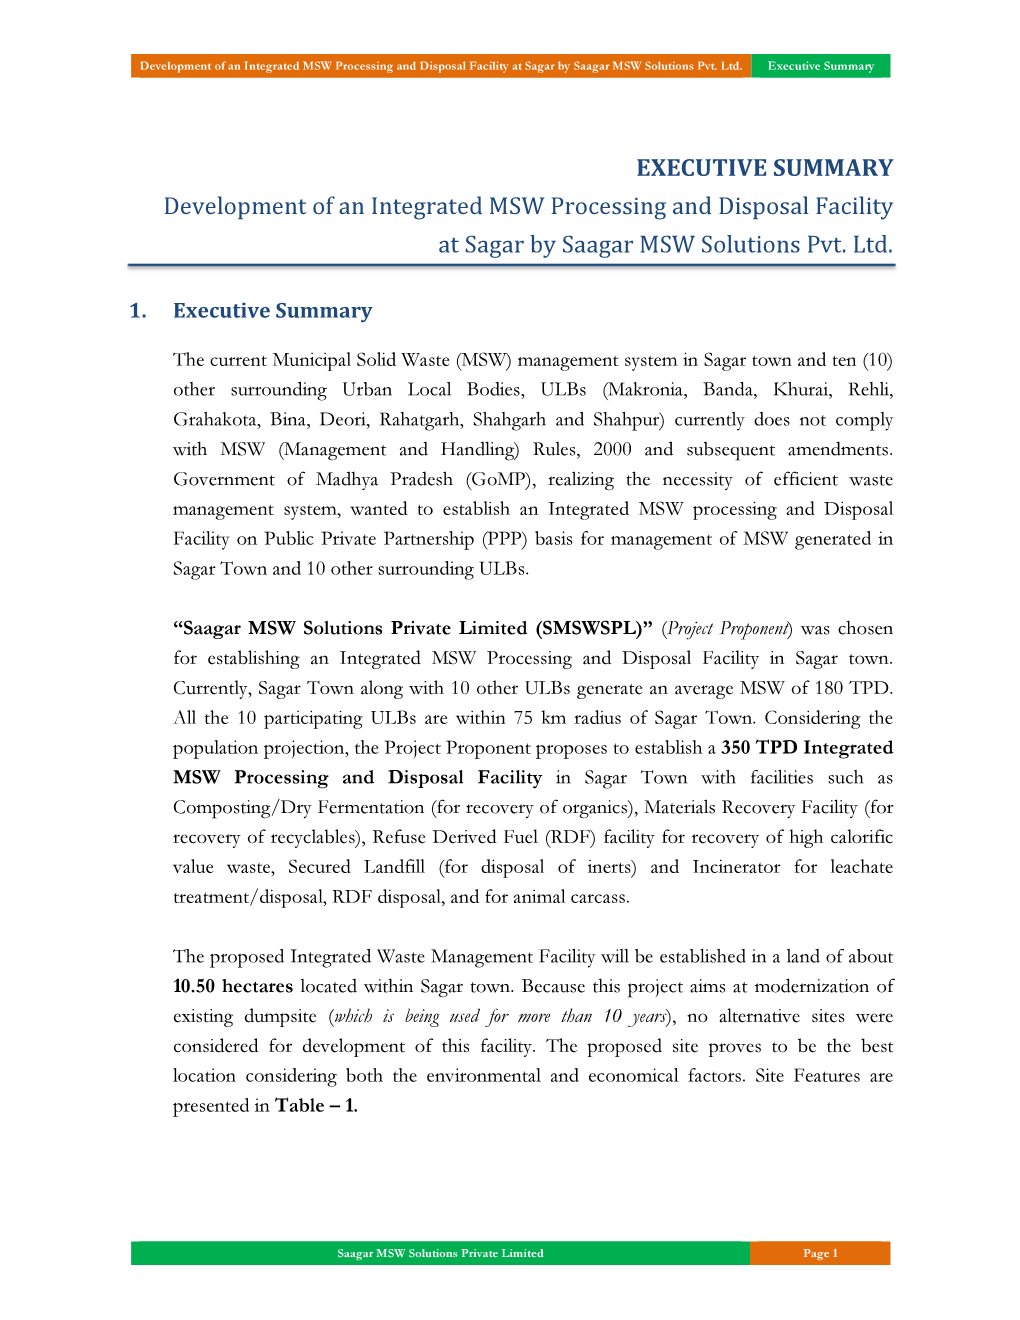 EXECUTIVE SUMMARY Development of an Integrated MSW Processing and Disposal Facility at Sagar by Saagar MSW Solutions Pvt